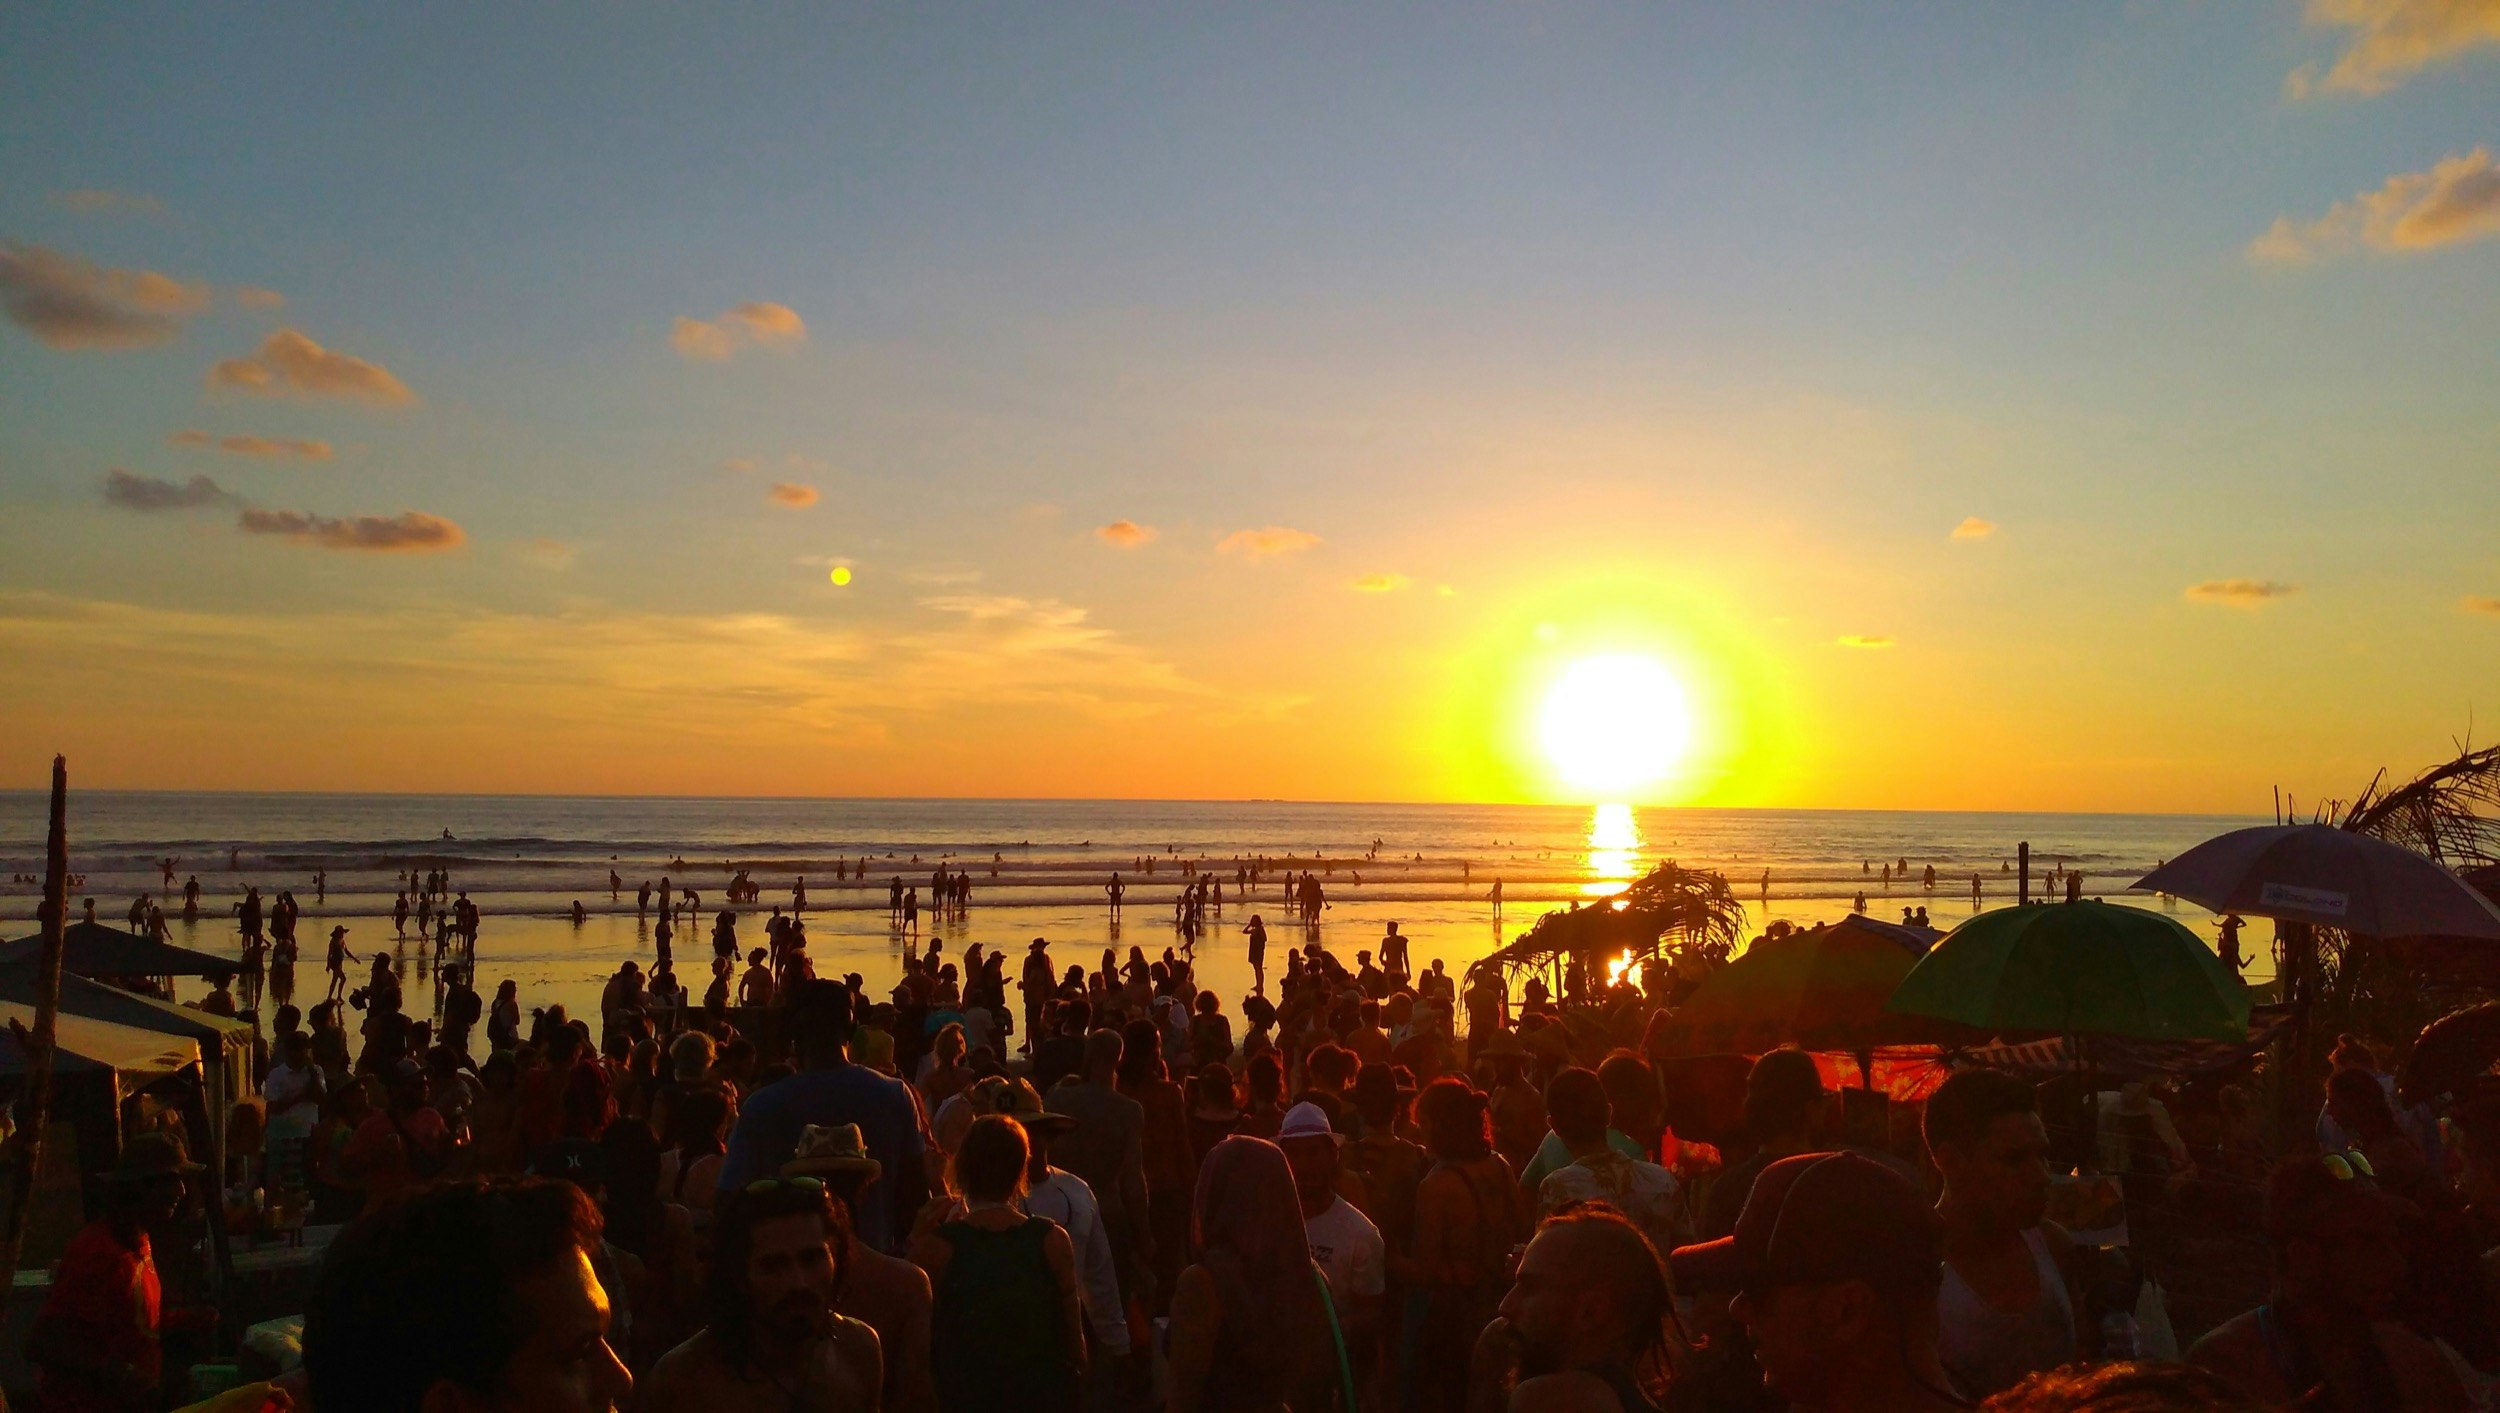 The sun sets over the pacific ocean as hundreds of people mill about on a Costa Rica beach and watch